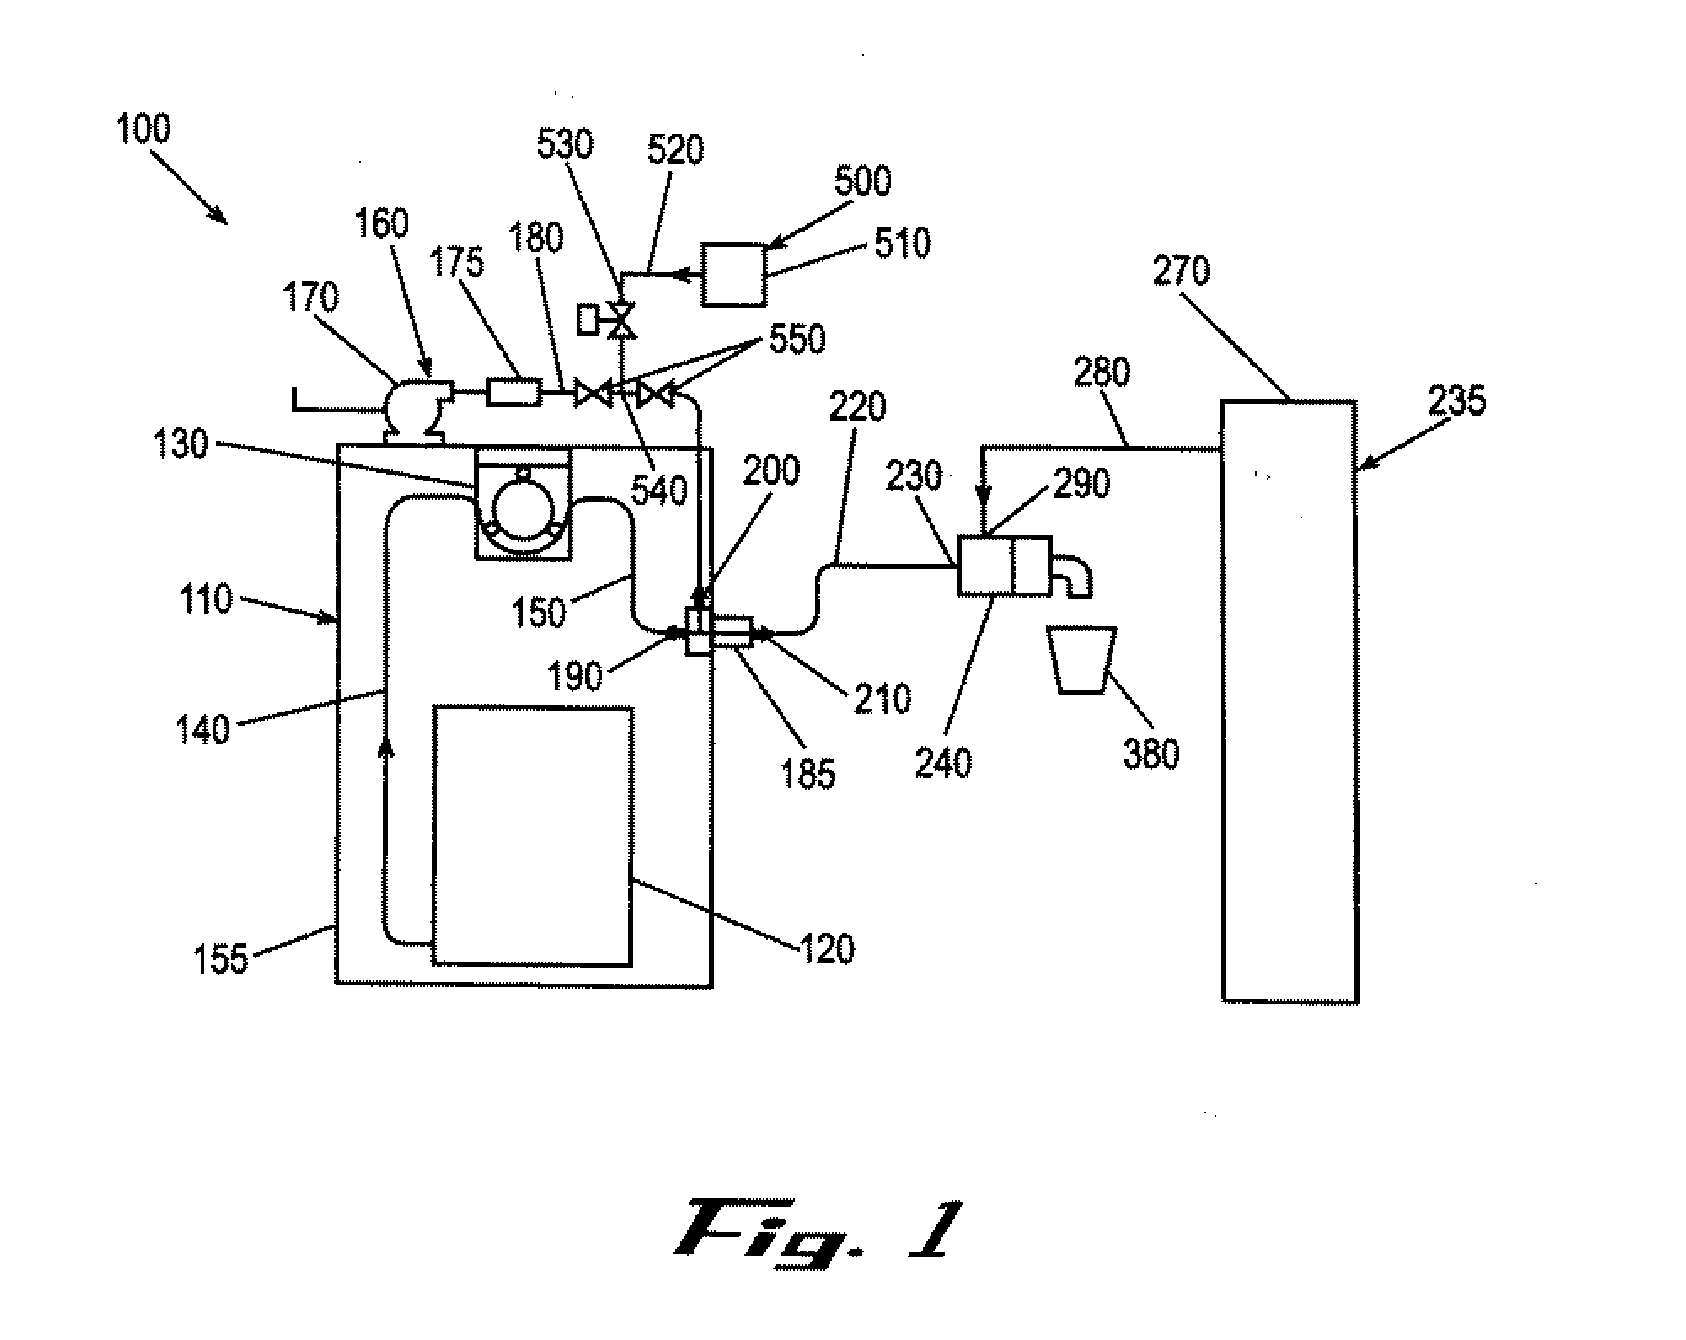 System and Method for Producing Foamed and Steamed Milk from Milk Concentrate